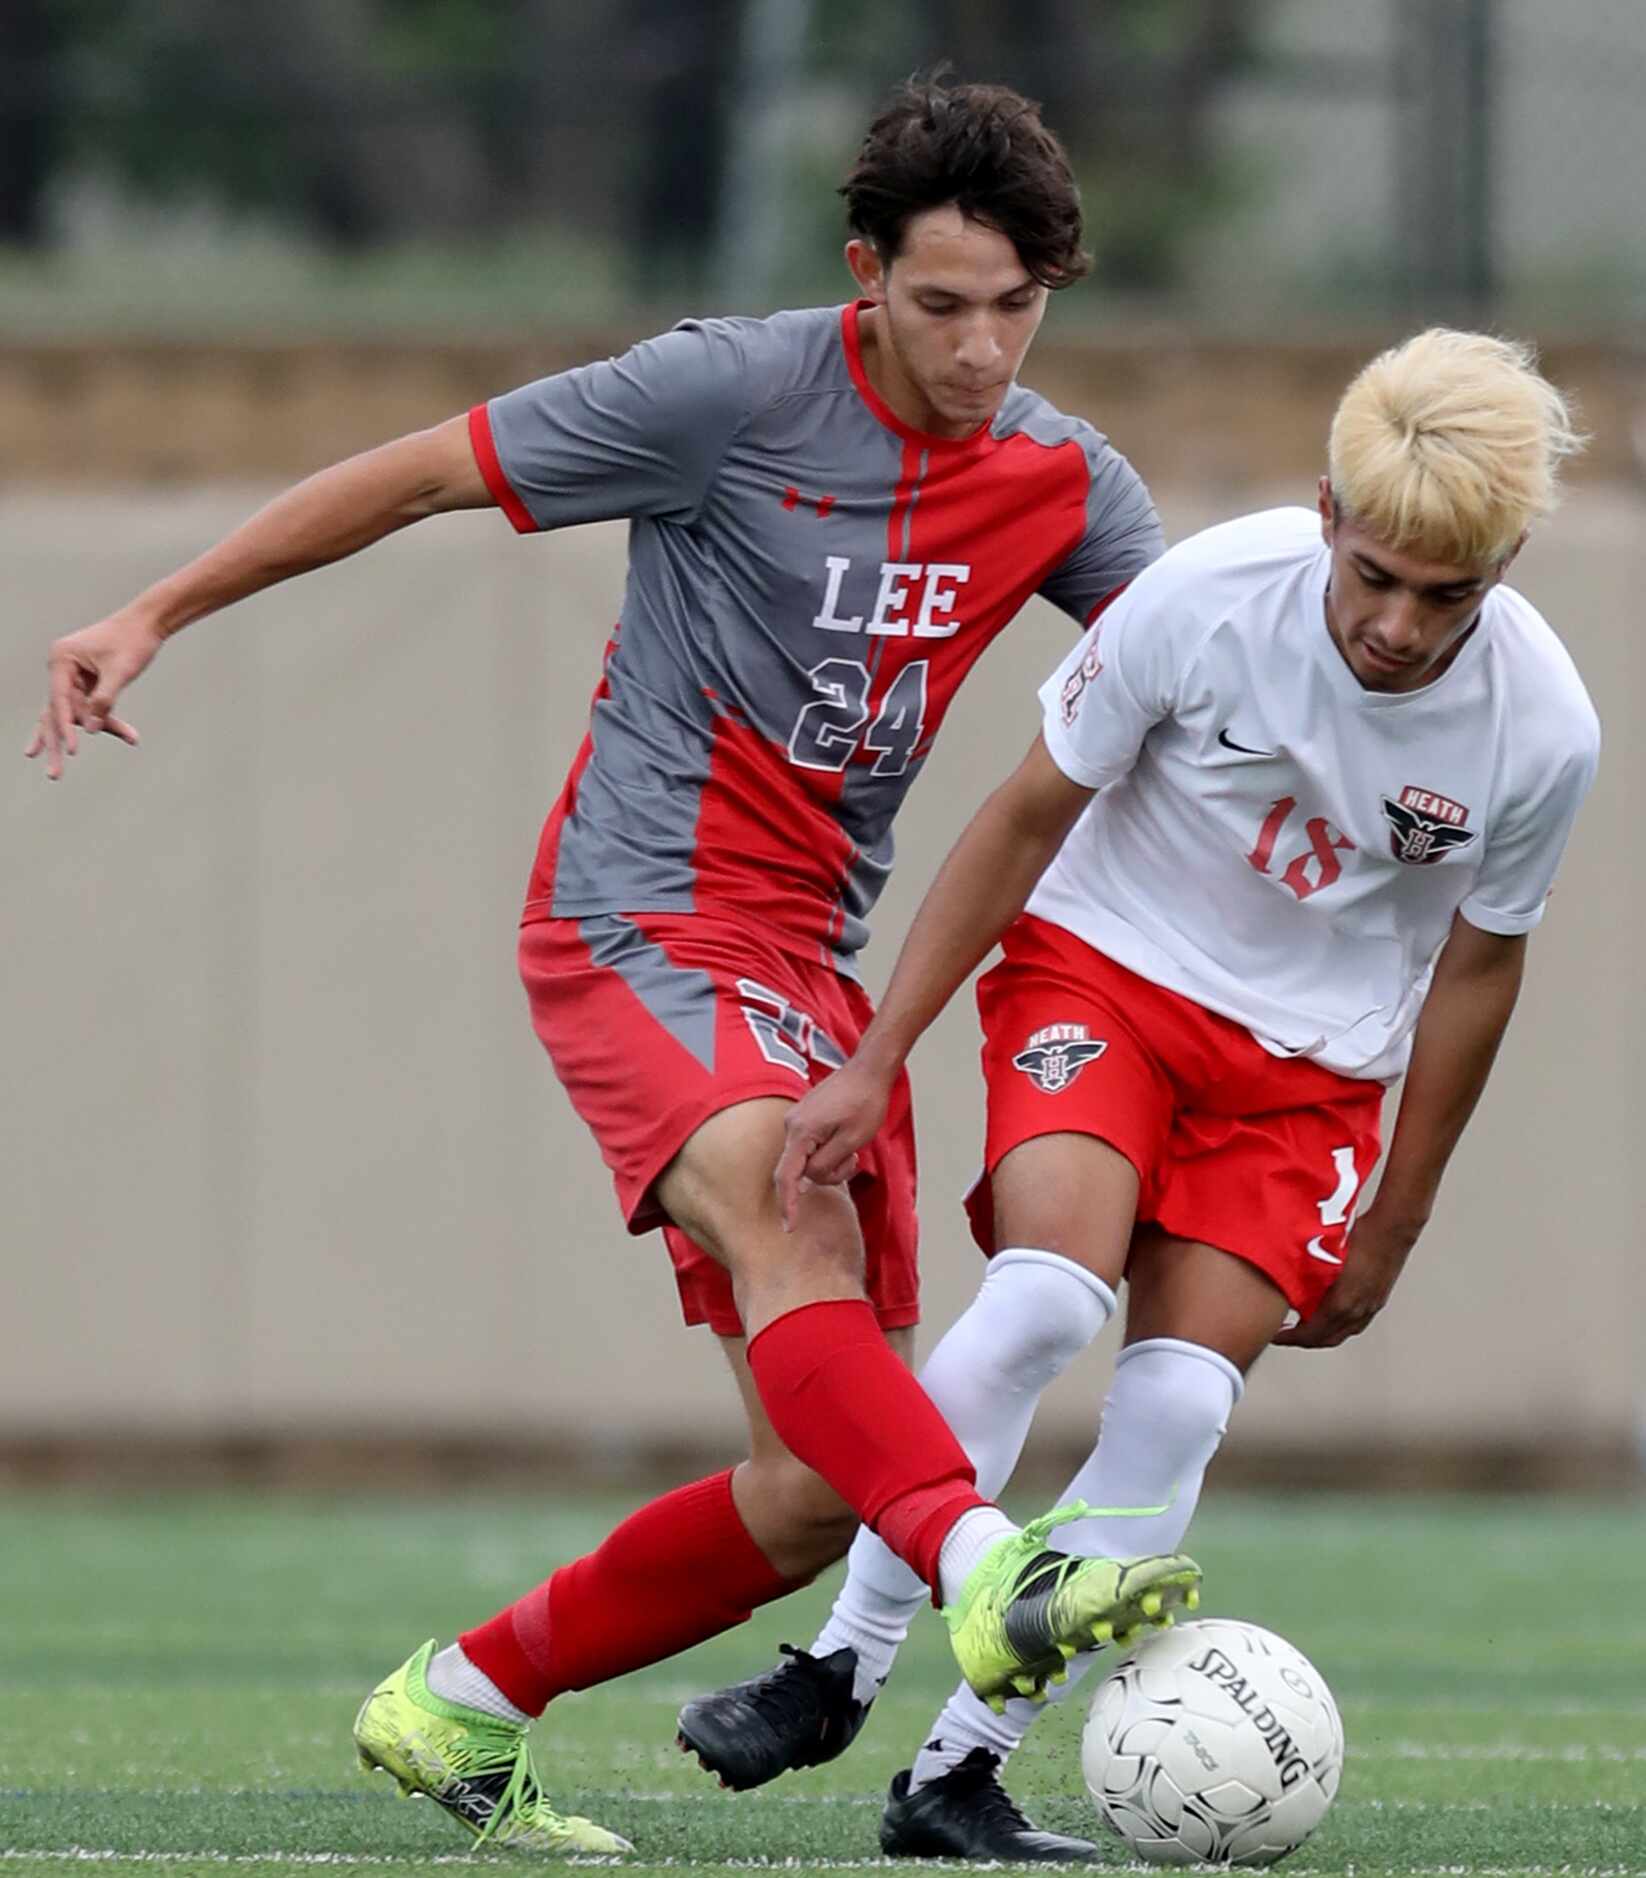 SA Lee's Julian Sanchez (24) and Rockwall-Heath's Luis Soto (18) struggle for control of the...